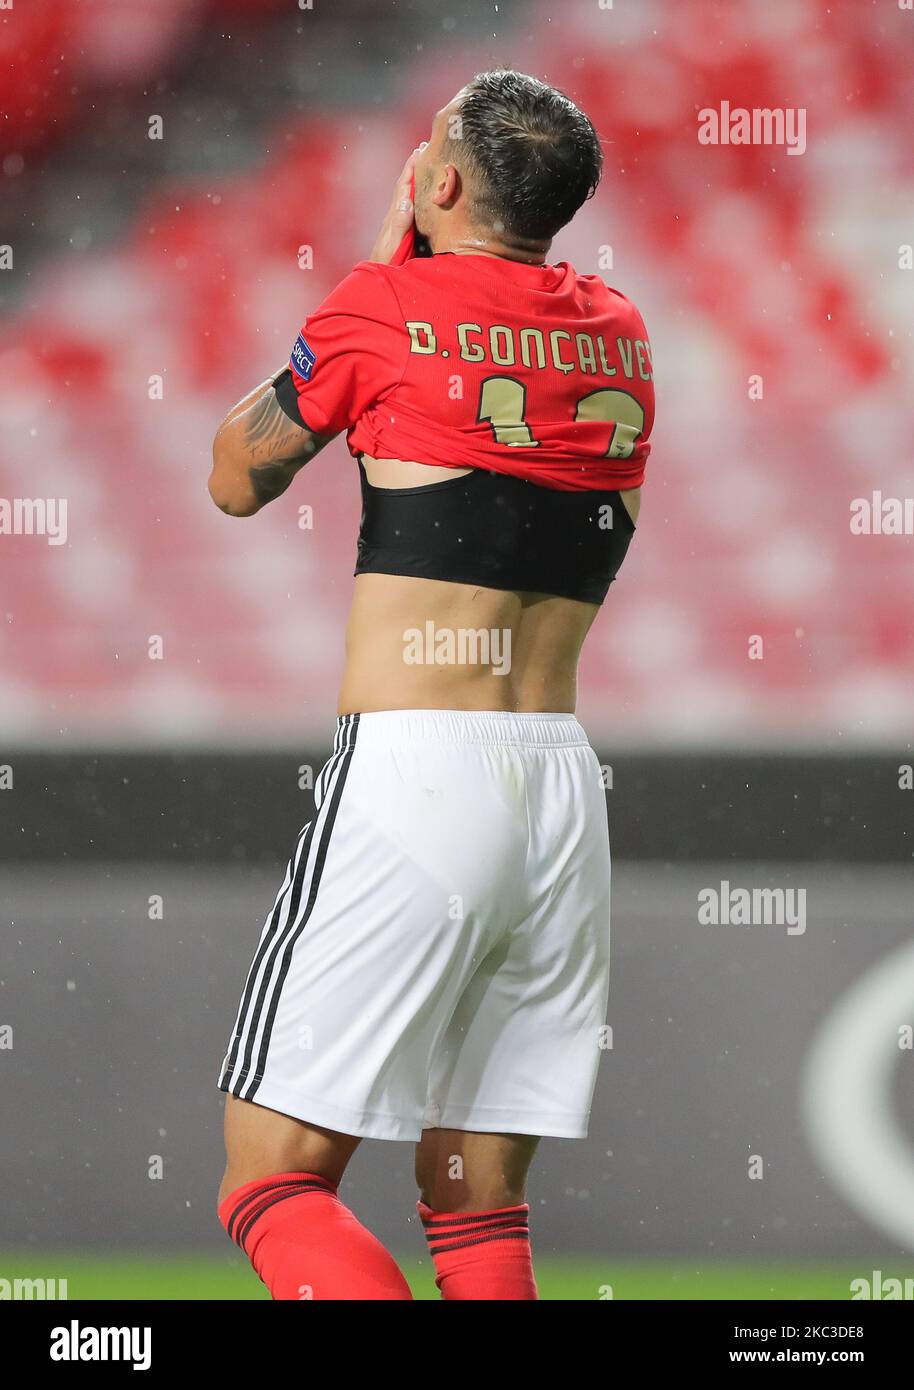 Diogo Goncalves of SL Benfica after scoring a own goal during the UEFA Europa League Group D stage match between SL Benfica and Rangers FC at Estadio da Luz on November 5, 2020 in Lisbon, Portugal. (Photo by Paulo Nascimento/NurPhoto) Stock Photo